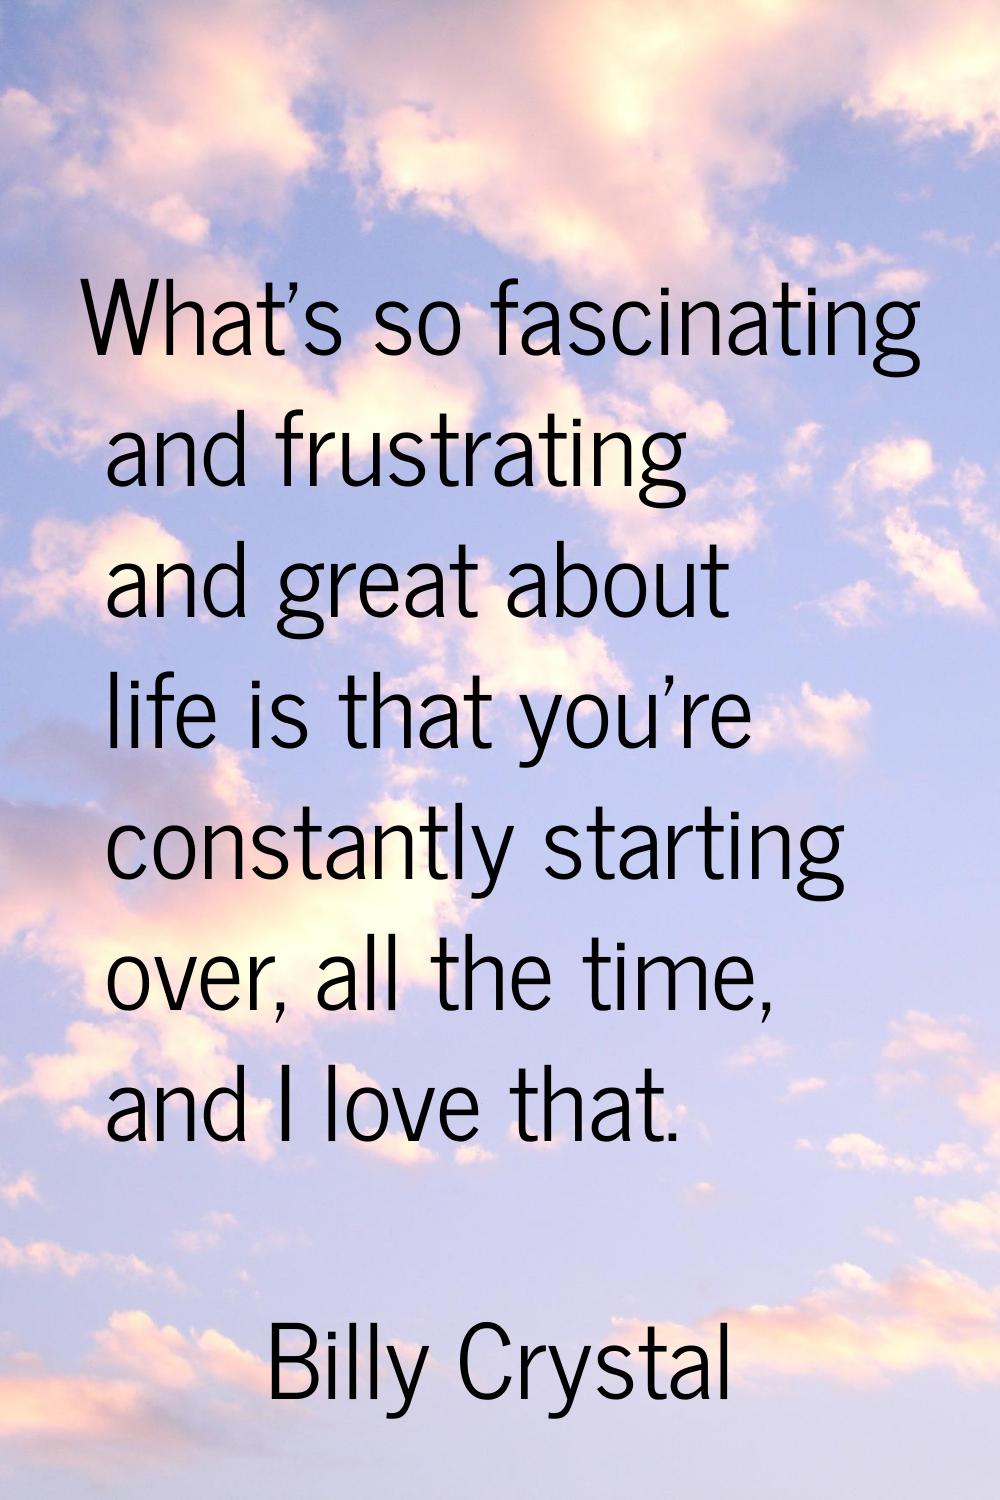 What's so fascinating and frustrating and great about life is that you're constantly starting over,